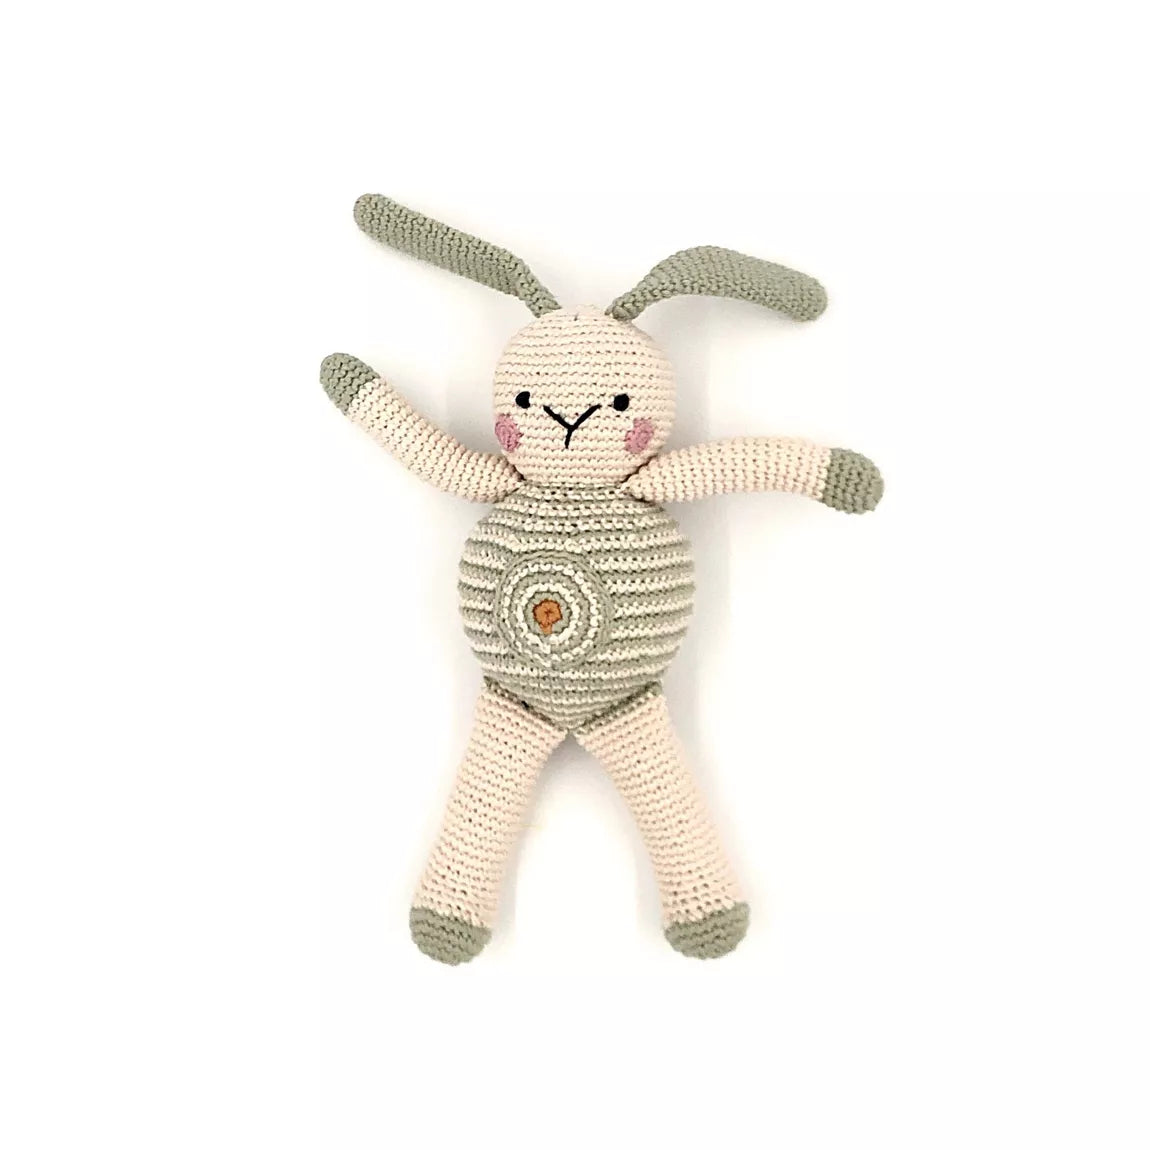 Pebble Fair Trade Hand Knitted Bunny